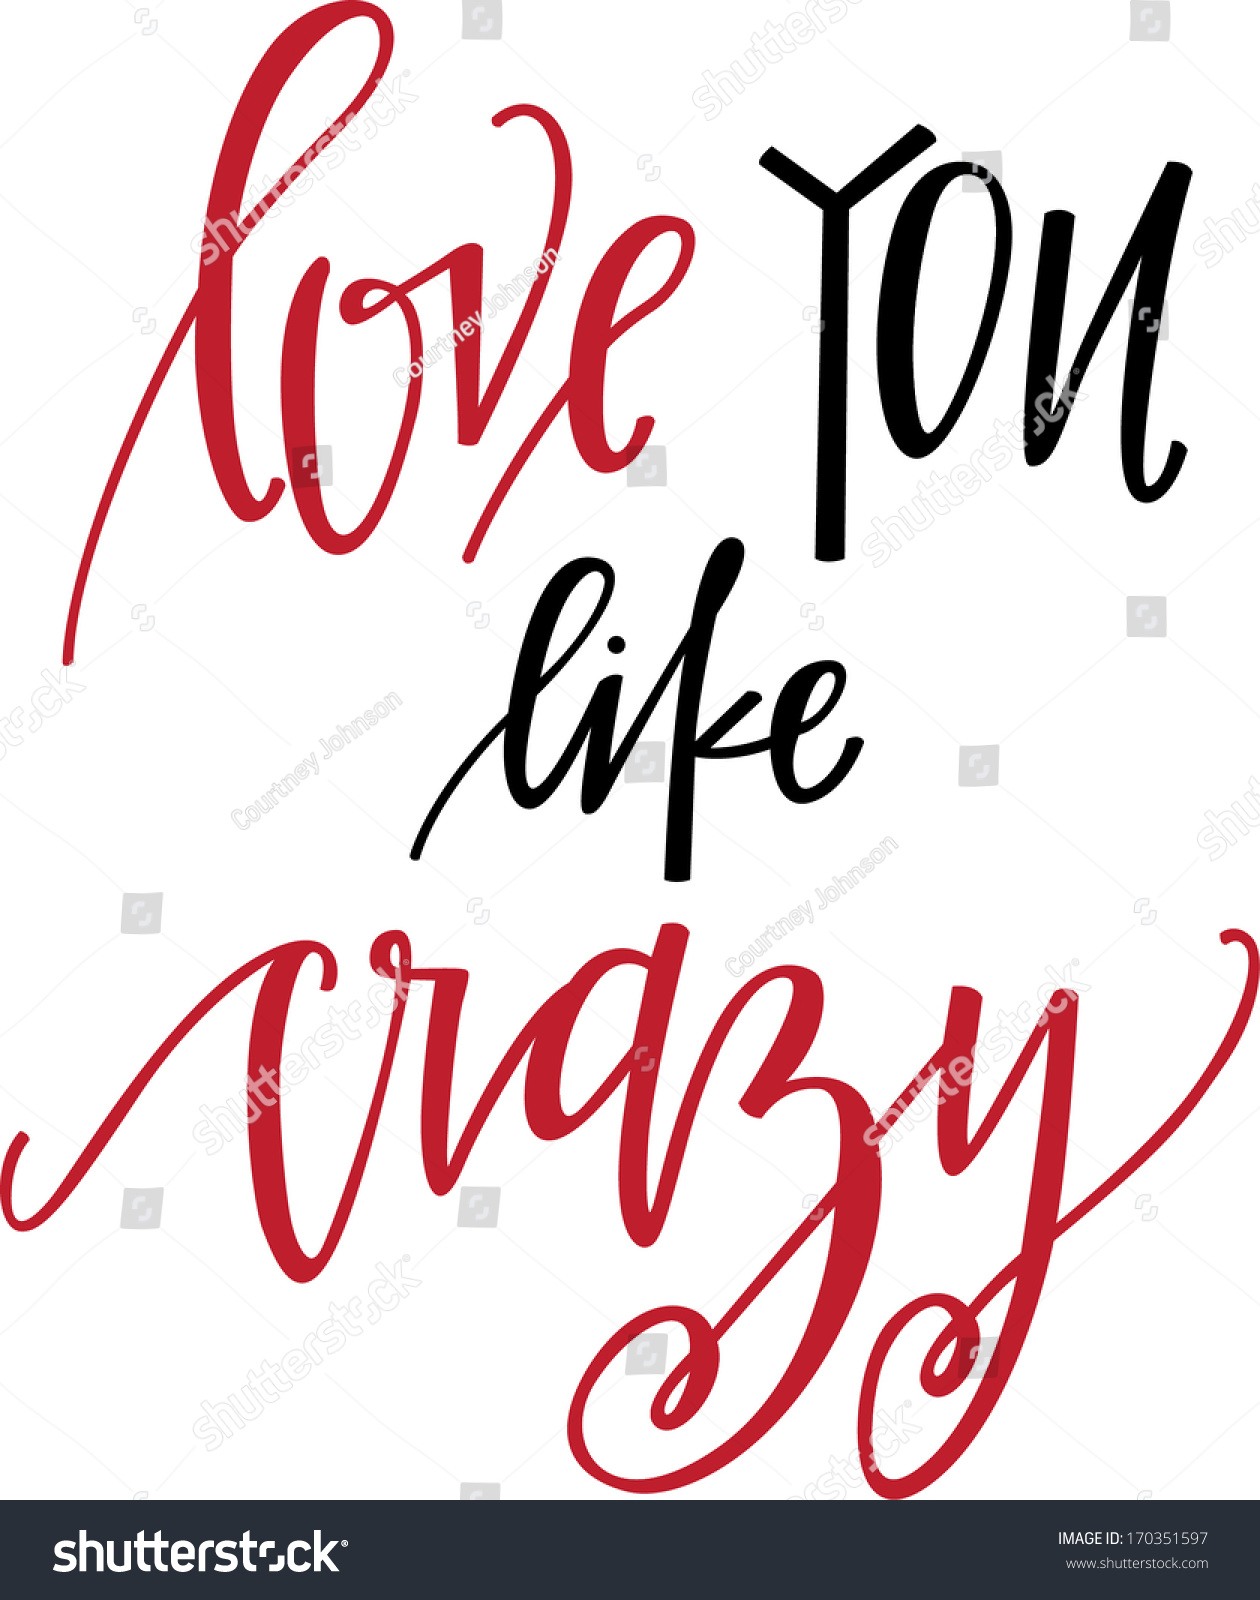 Download Love You Like Crazy Stock Vector 170351597 - Shutterstock